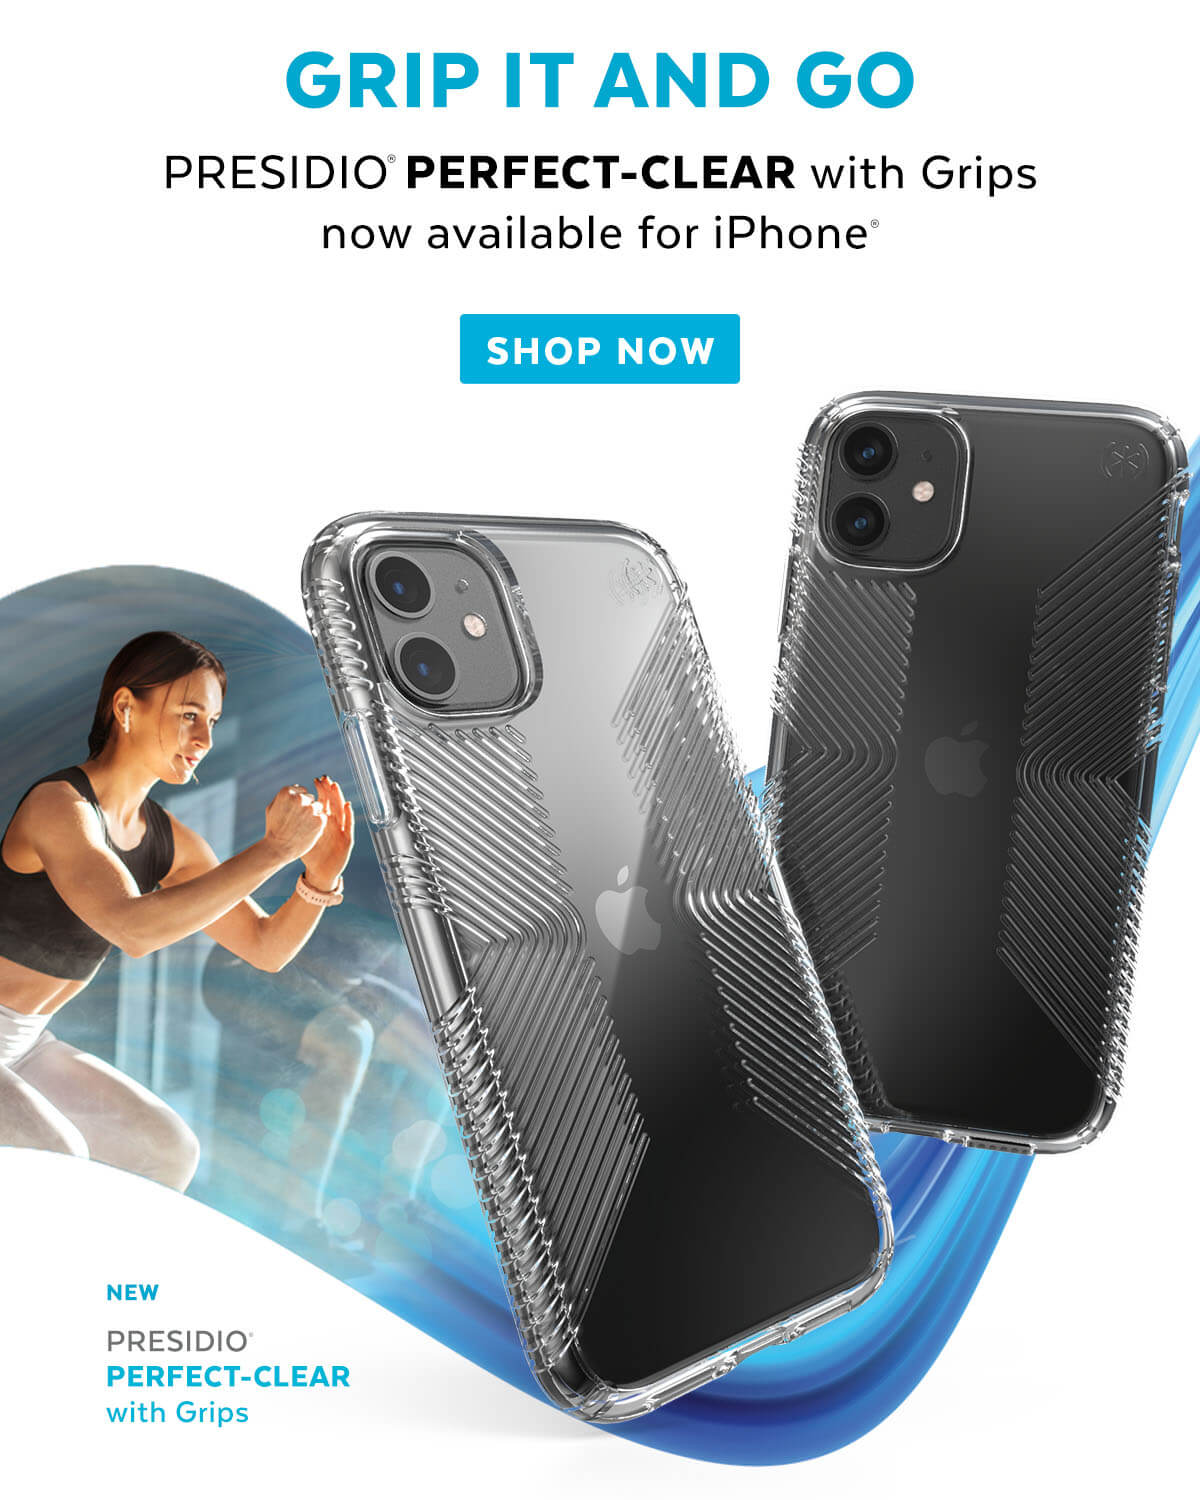 Grip It and Go. Presidio Perfect-Clear with Grips now available for iPhone. Shop now.